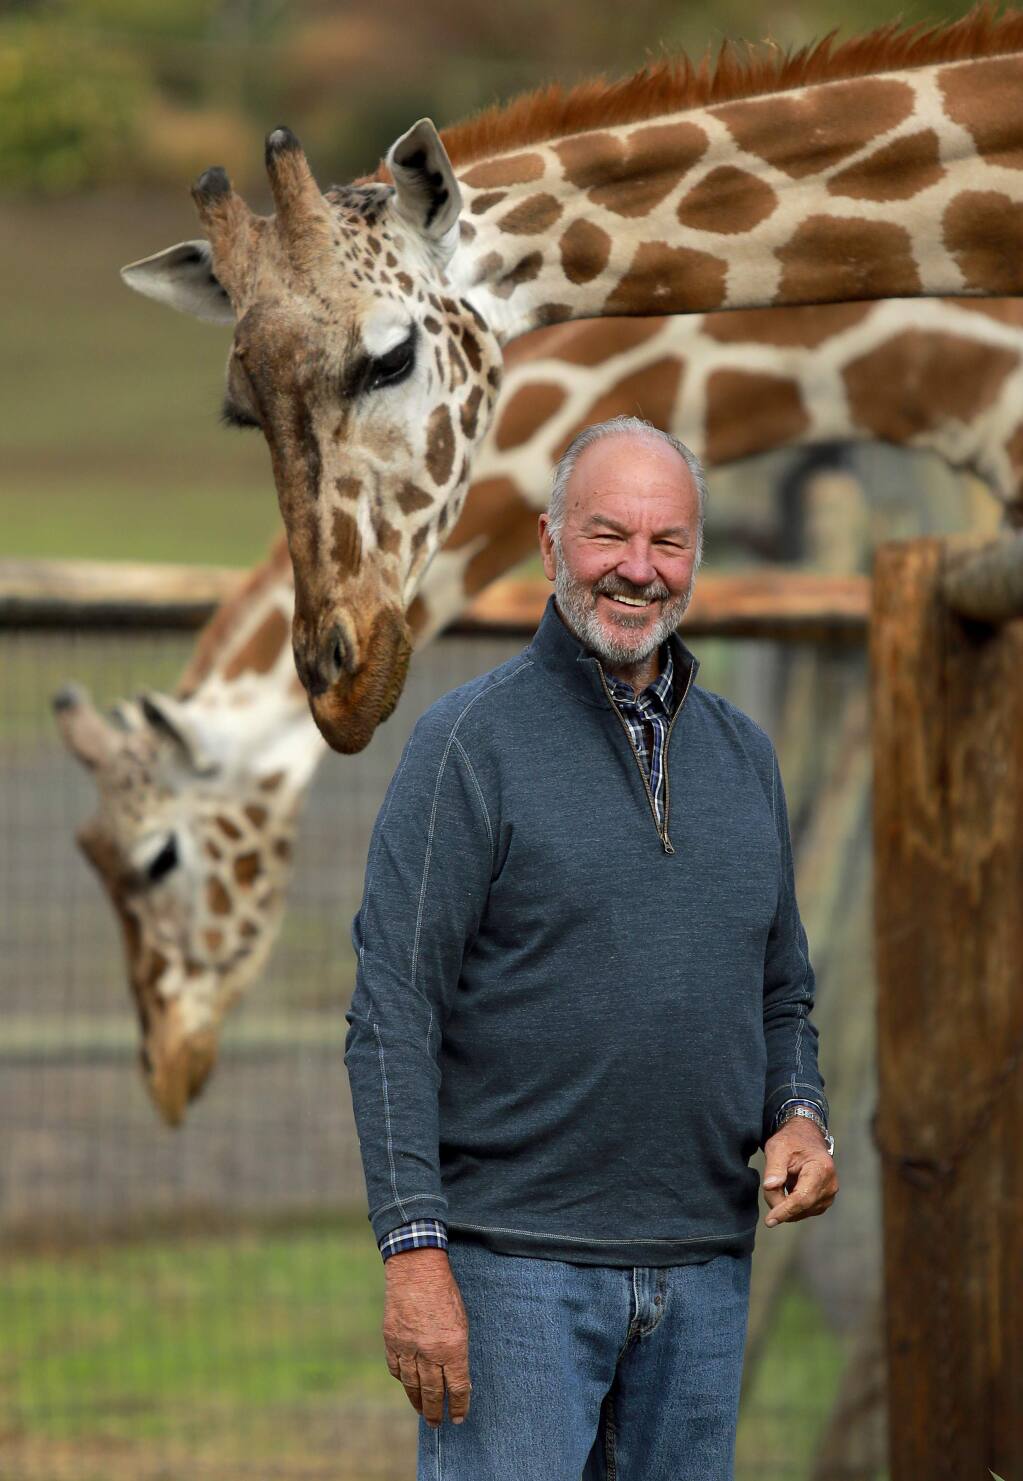 Safari West is hosting a dual celebration of World Giraffe Day and Father's Day with an excursion, games and barbecue on Sunday, June 17. (File photo by John Burgess/The Press Democrat)